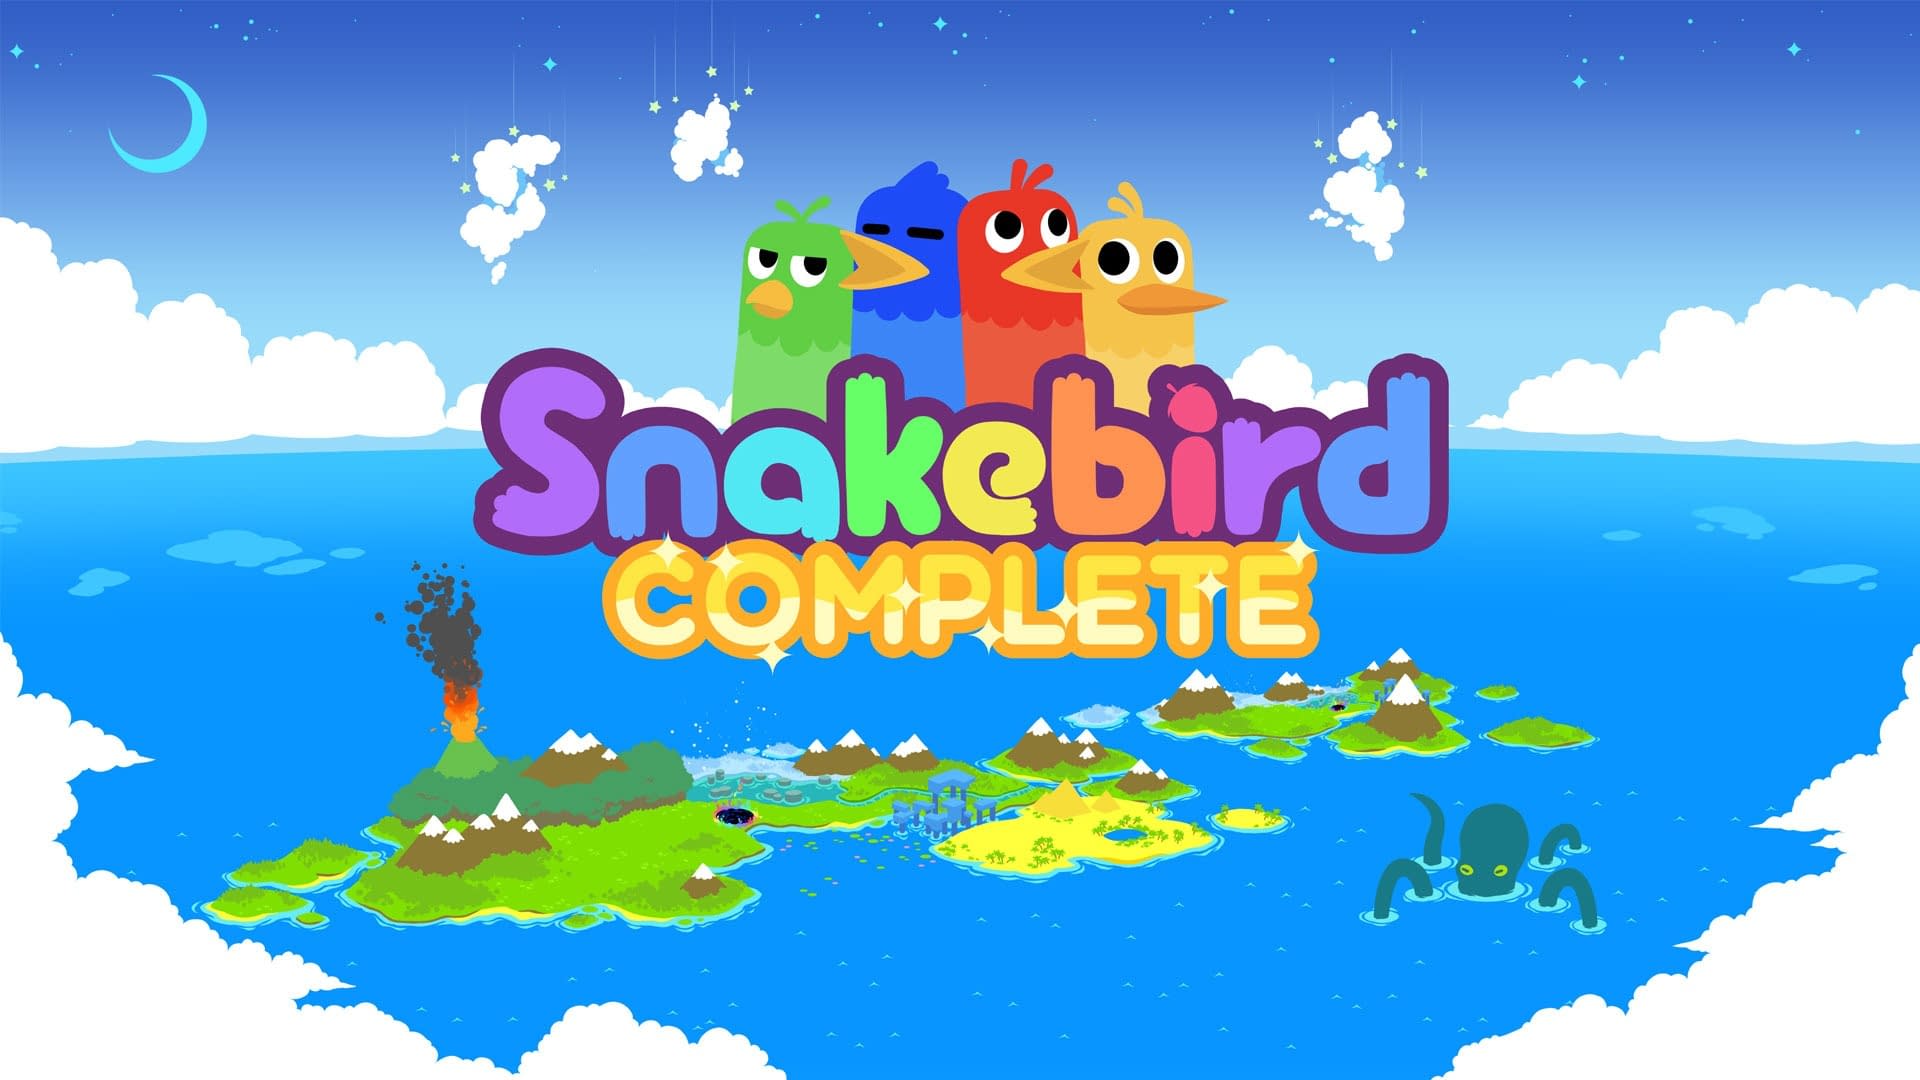 Free at Snakebird Complete Games